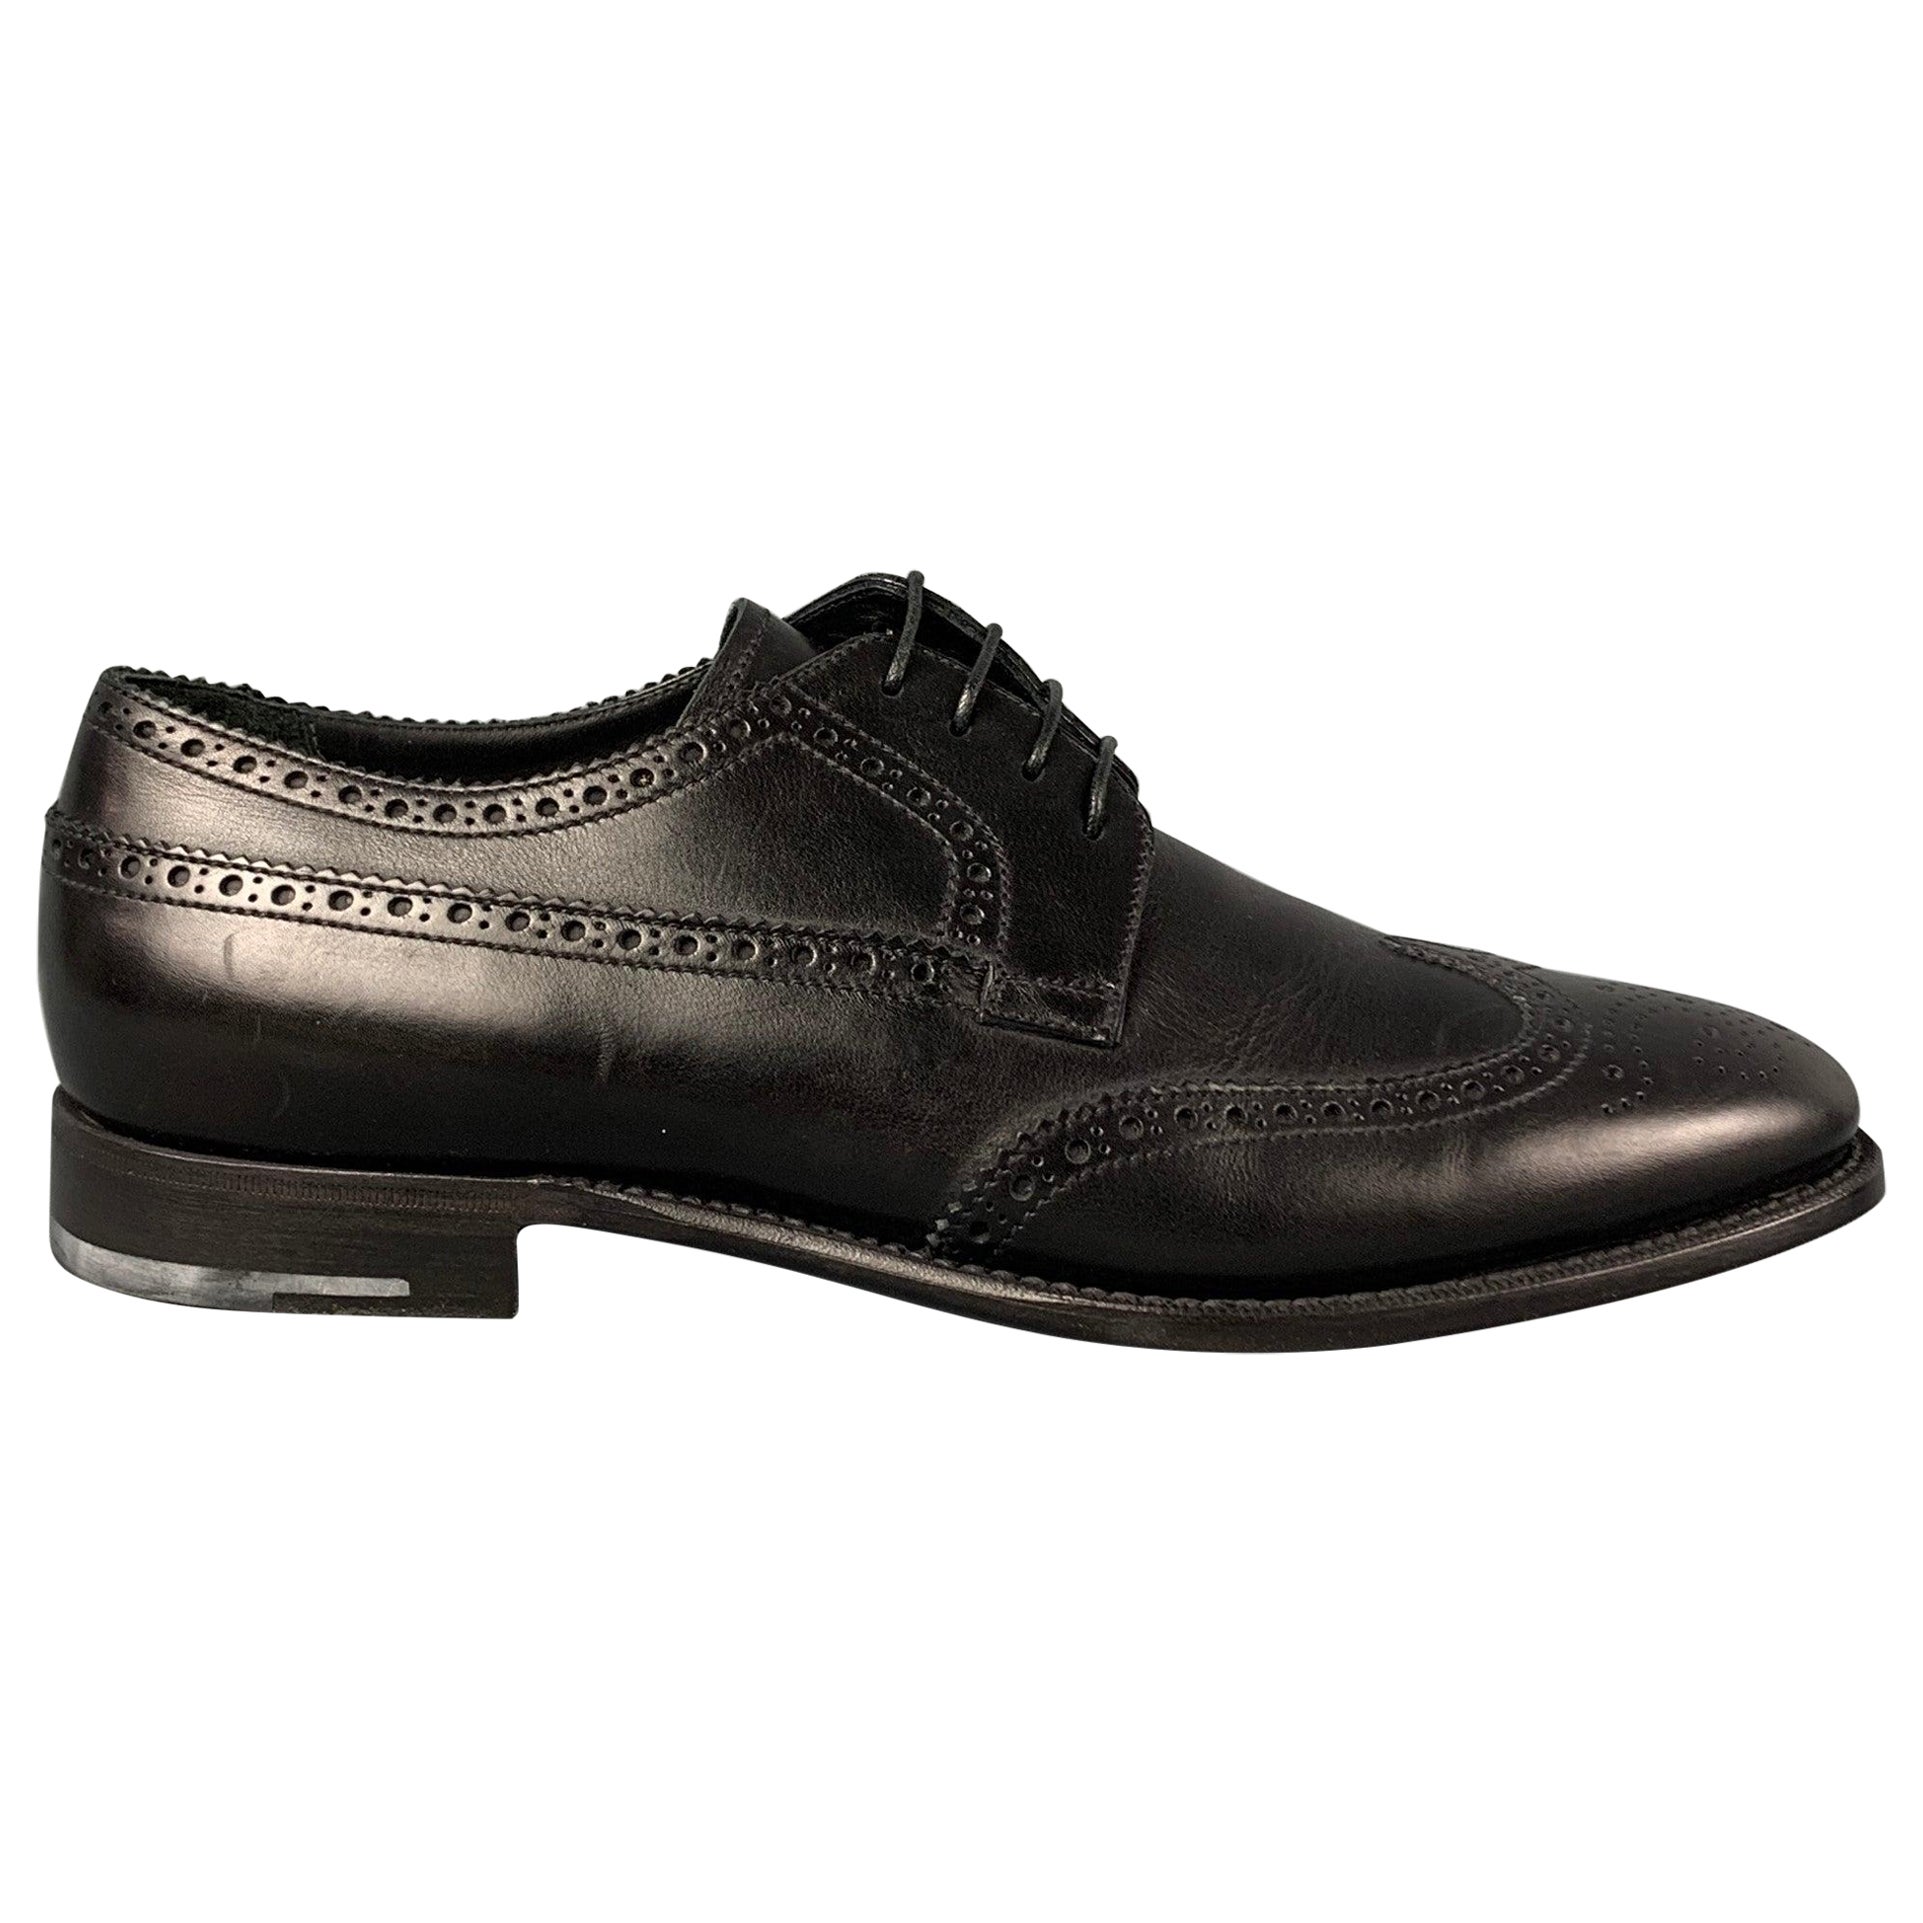 GIORGIO ARMANI Size 10 Black Perforated Leather Wingtip Lace Up Shoes For Sale